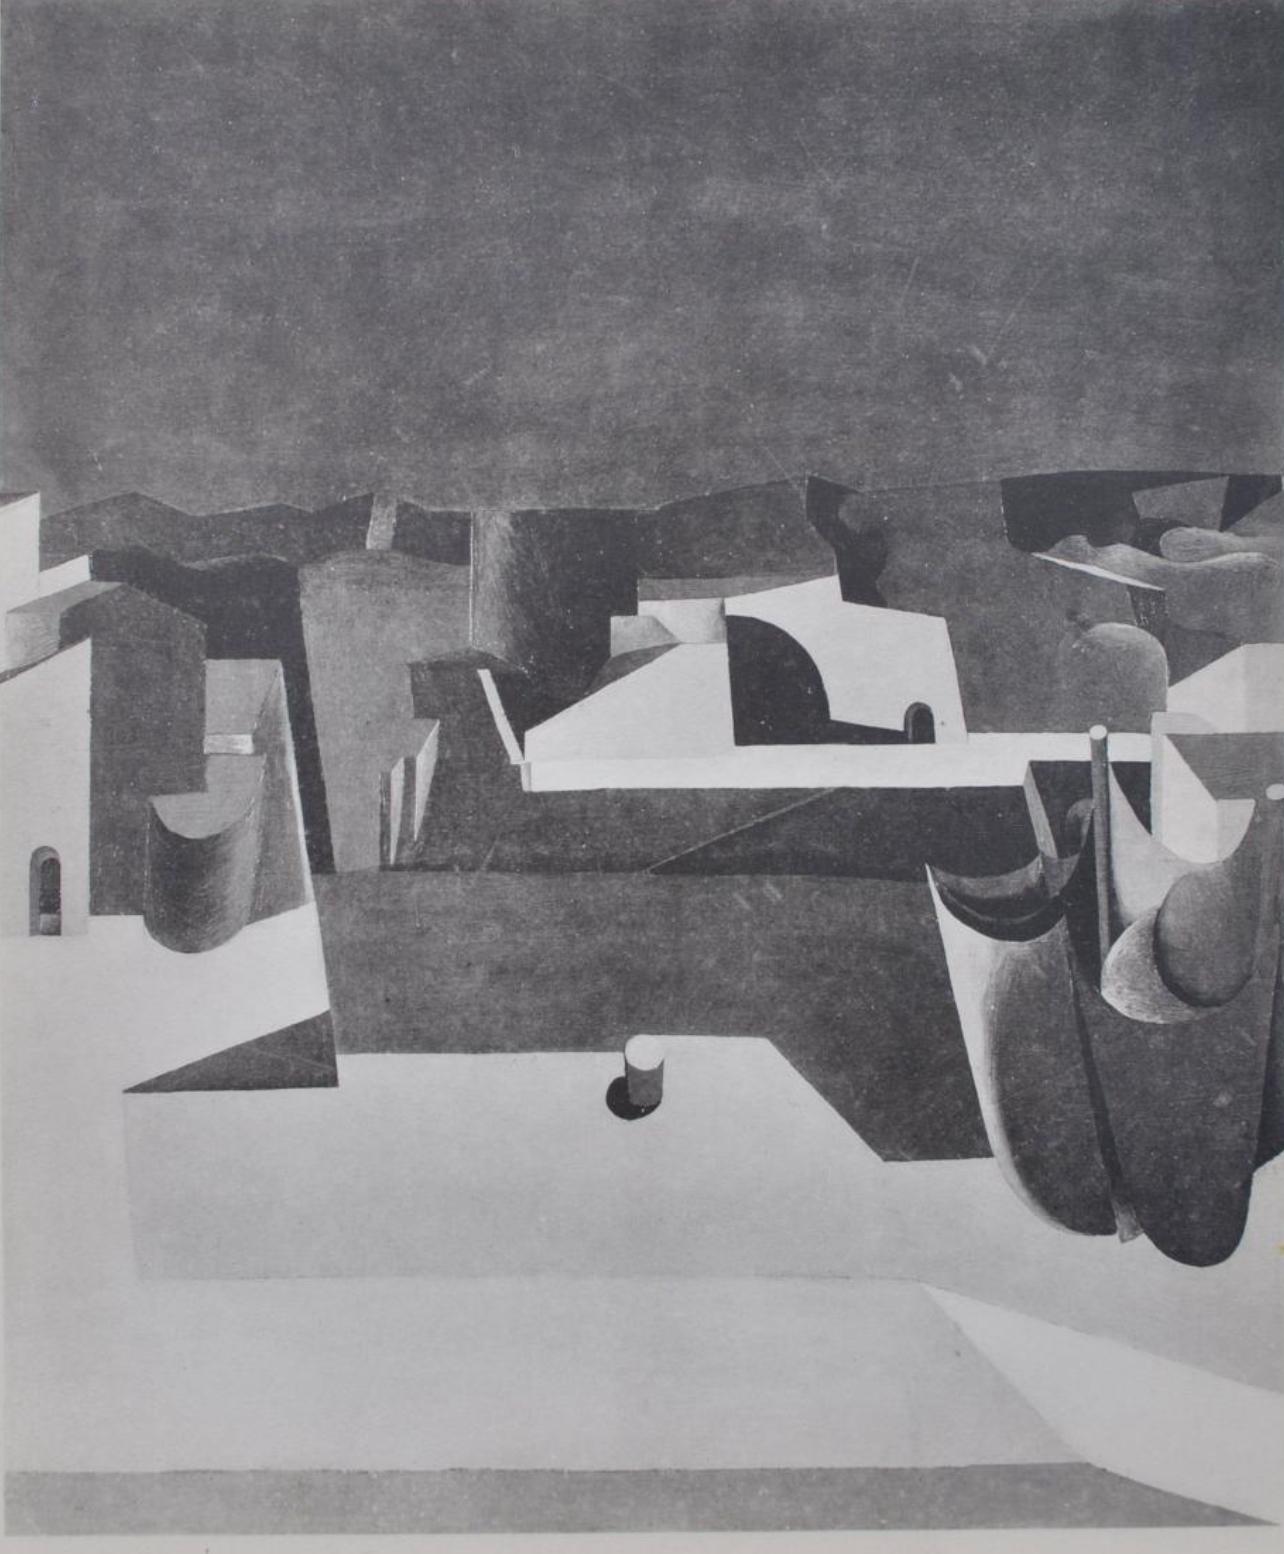 Lithograph on wove paper. Unsigned and unnumbered, as issued. Good Condition; never framed or matted. Notes: From the volume, Le Corbusier Œuvre Plastique, 1938. Published under the direction of Jean Badovici, Paris; printed by Éditions Albert